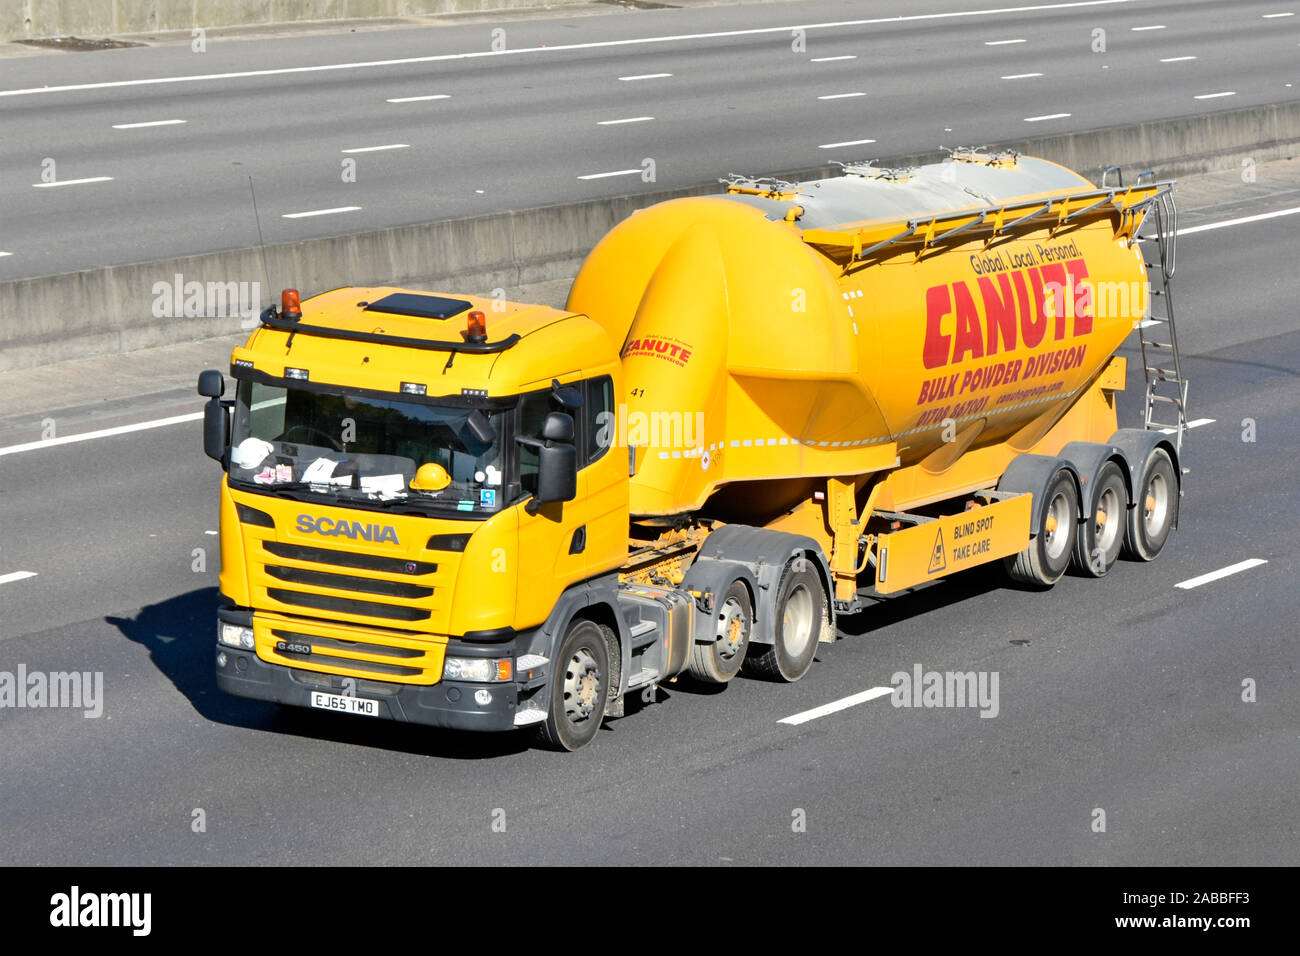 Yellow Canute transport bulk powder supply chain business group tanker trailer & Scania hgv lorry truck with raised axle driving along UK motorway Stock Photo